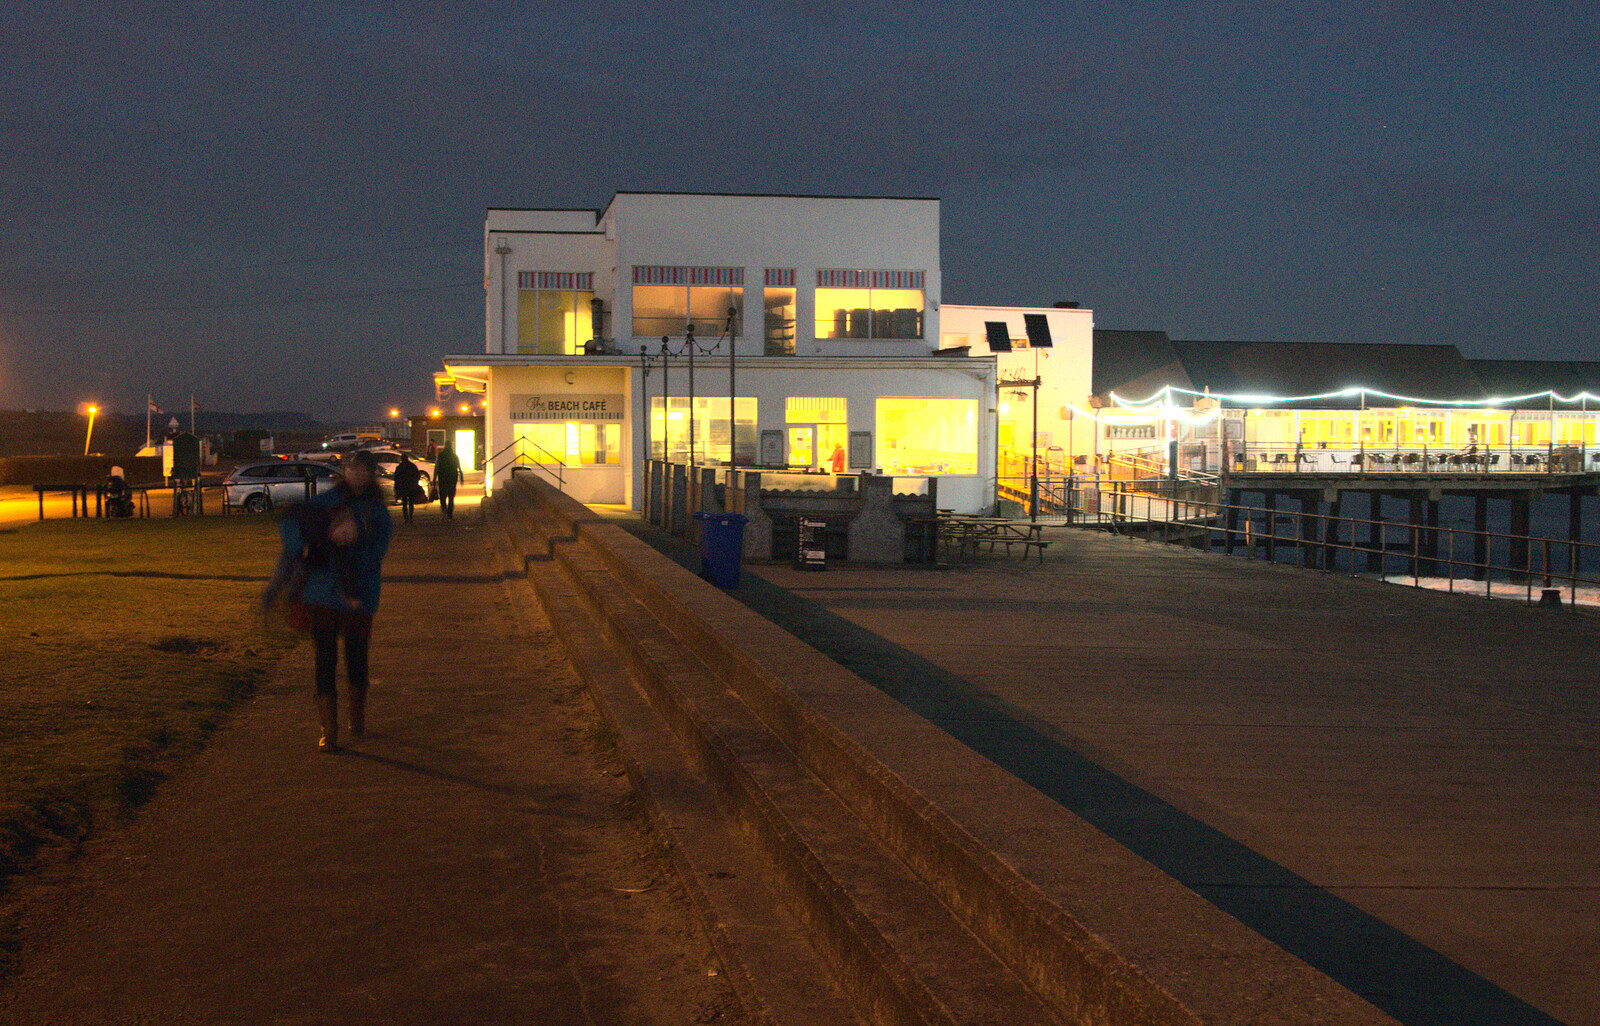 The amusement arcade on the seafront from Sunset on the Beach, Southwold, Suffolk - 30th December 2014